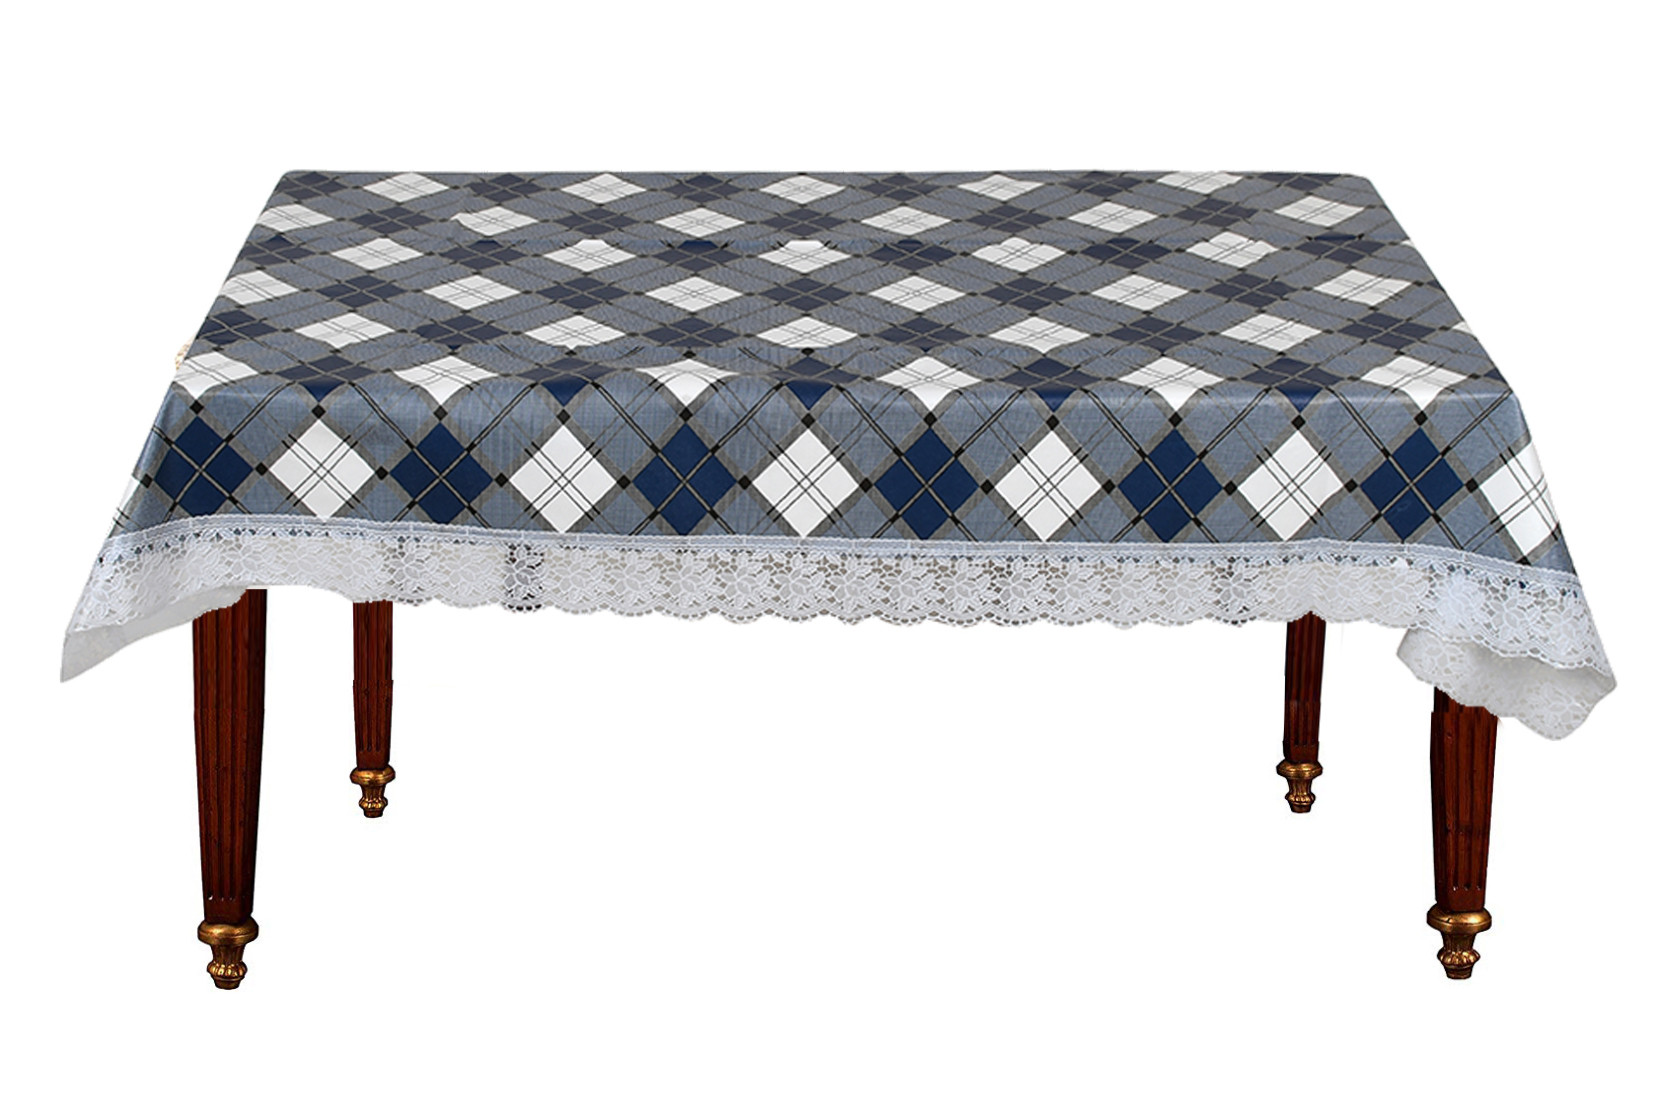 Kuber Industries Square Print PVC 6 Seater Dining Table Cover 60